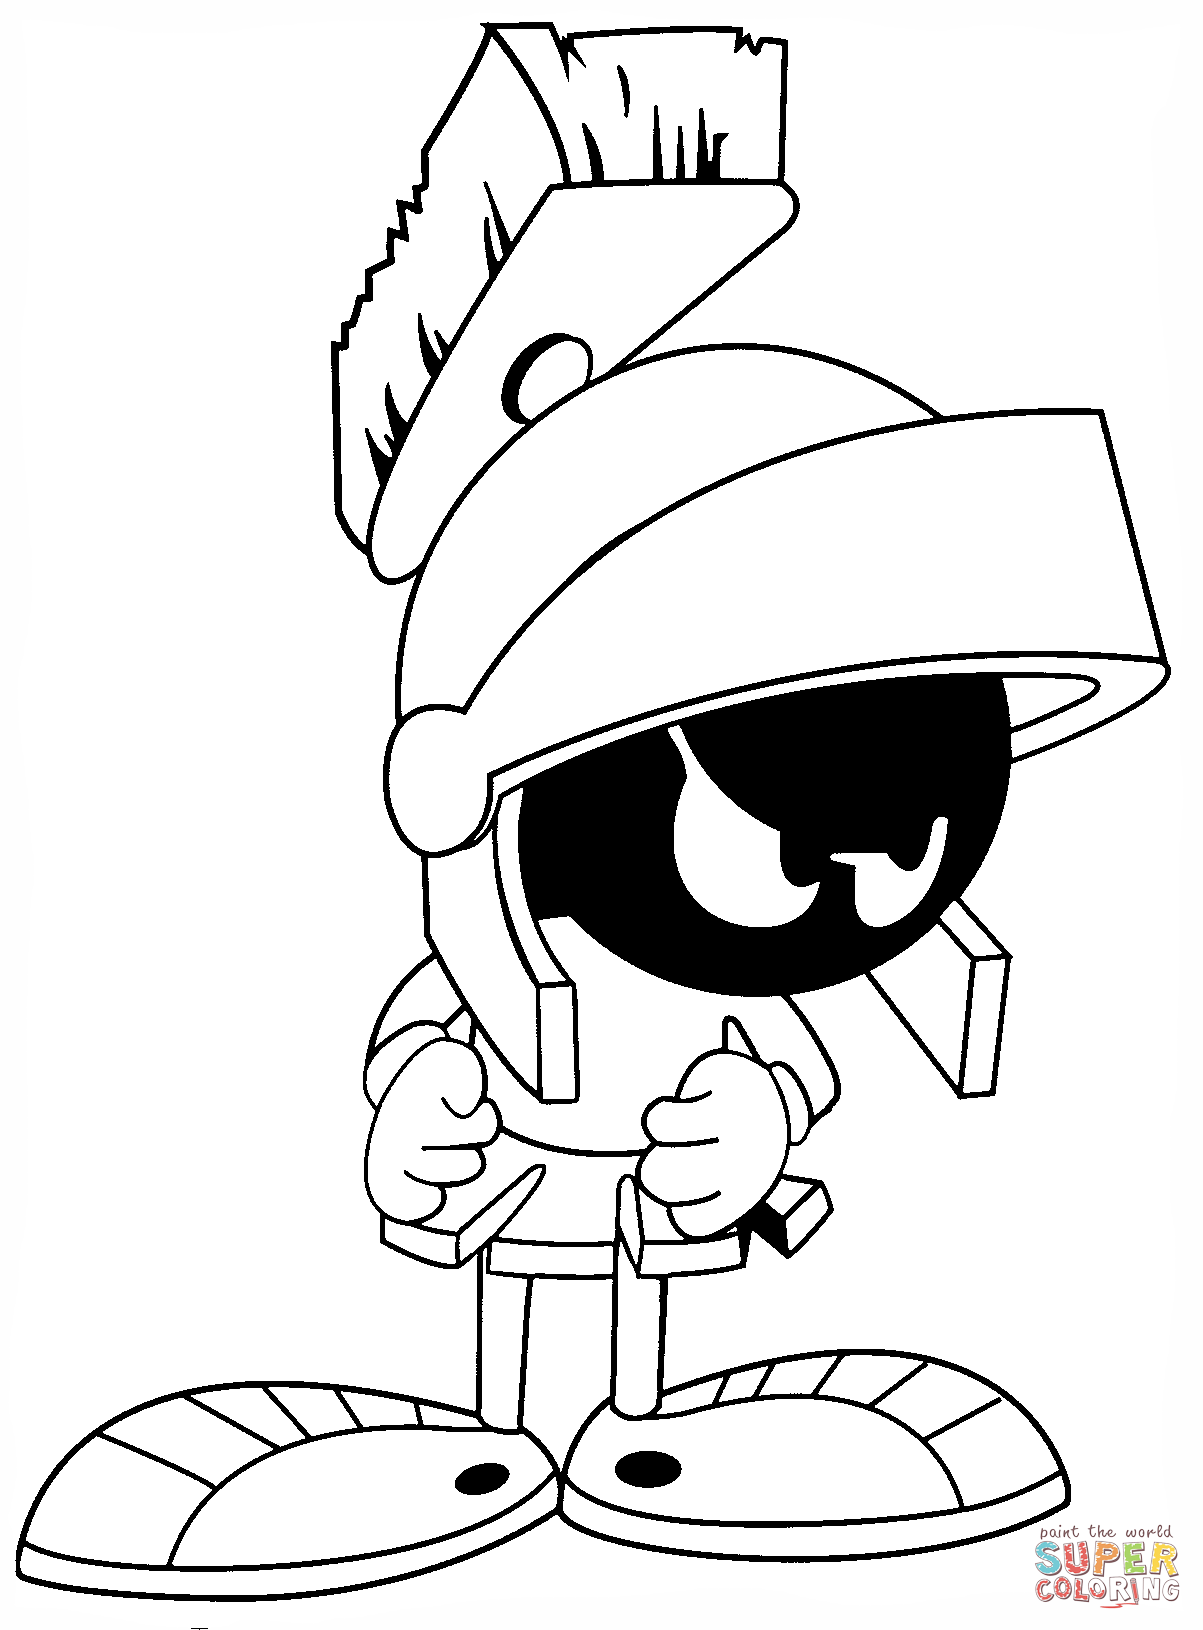 Marvin The Martian Coloring Page - Coloring Home